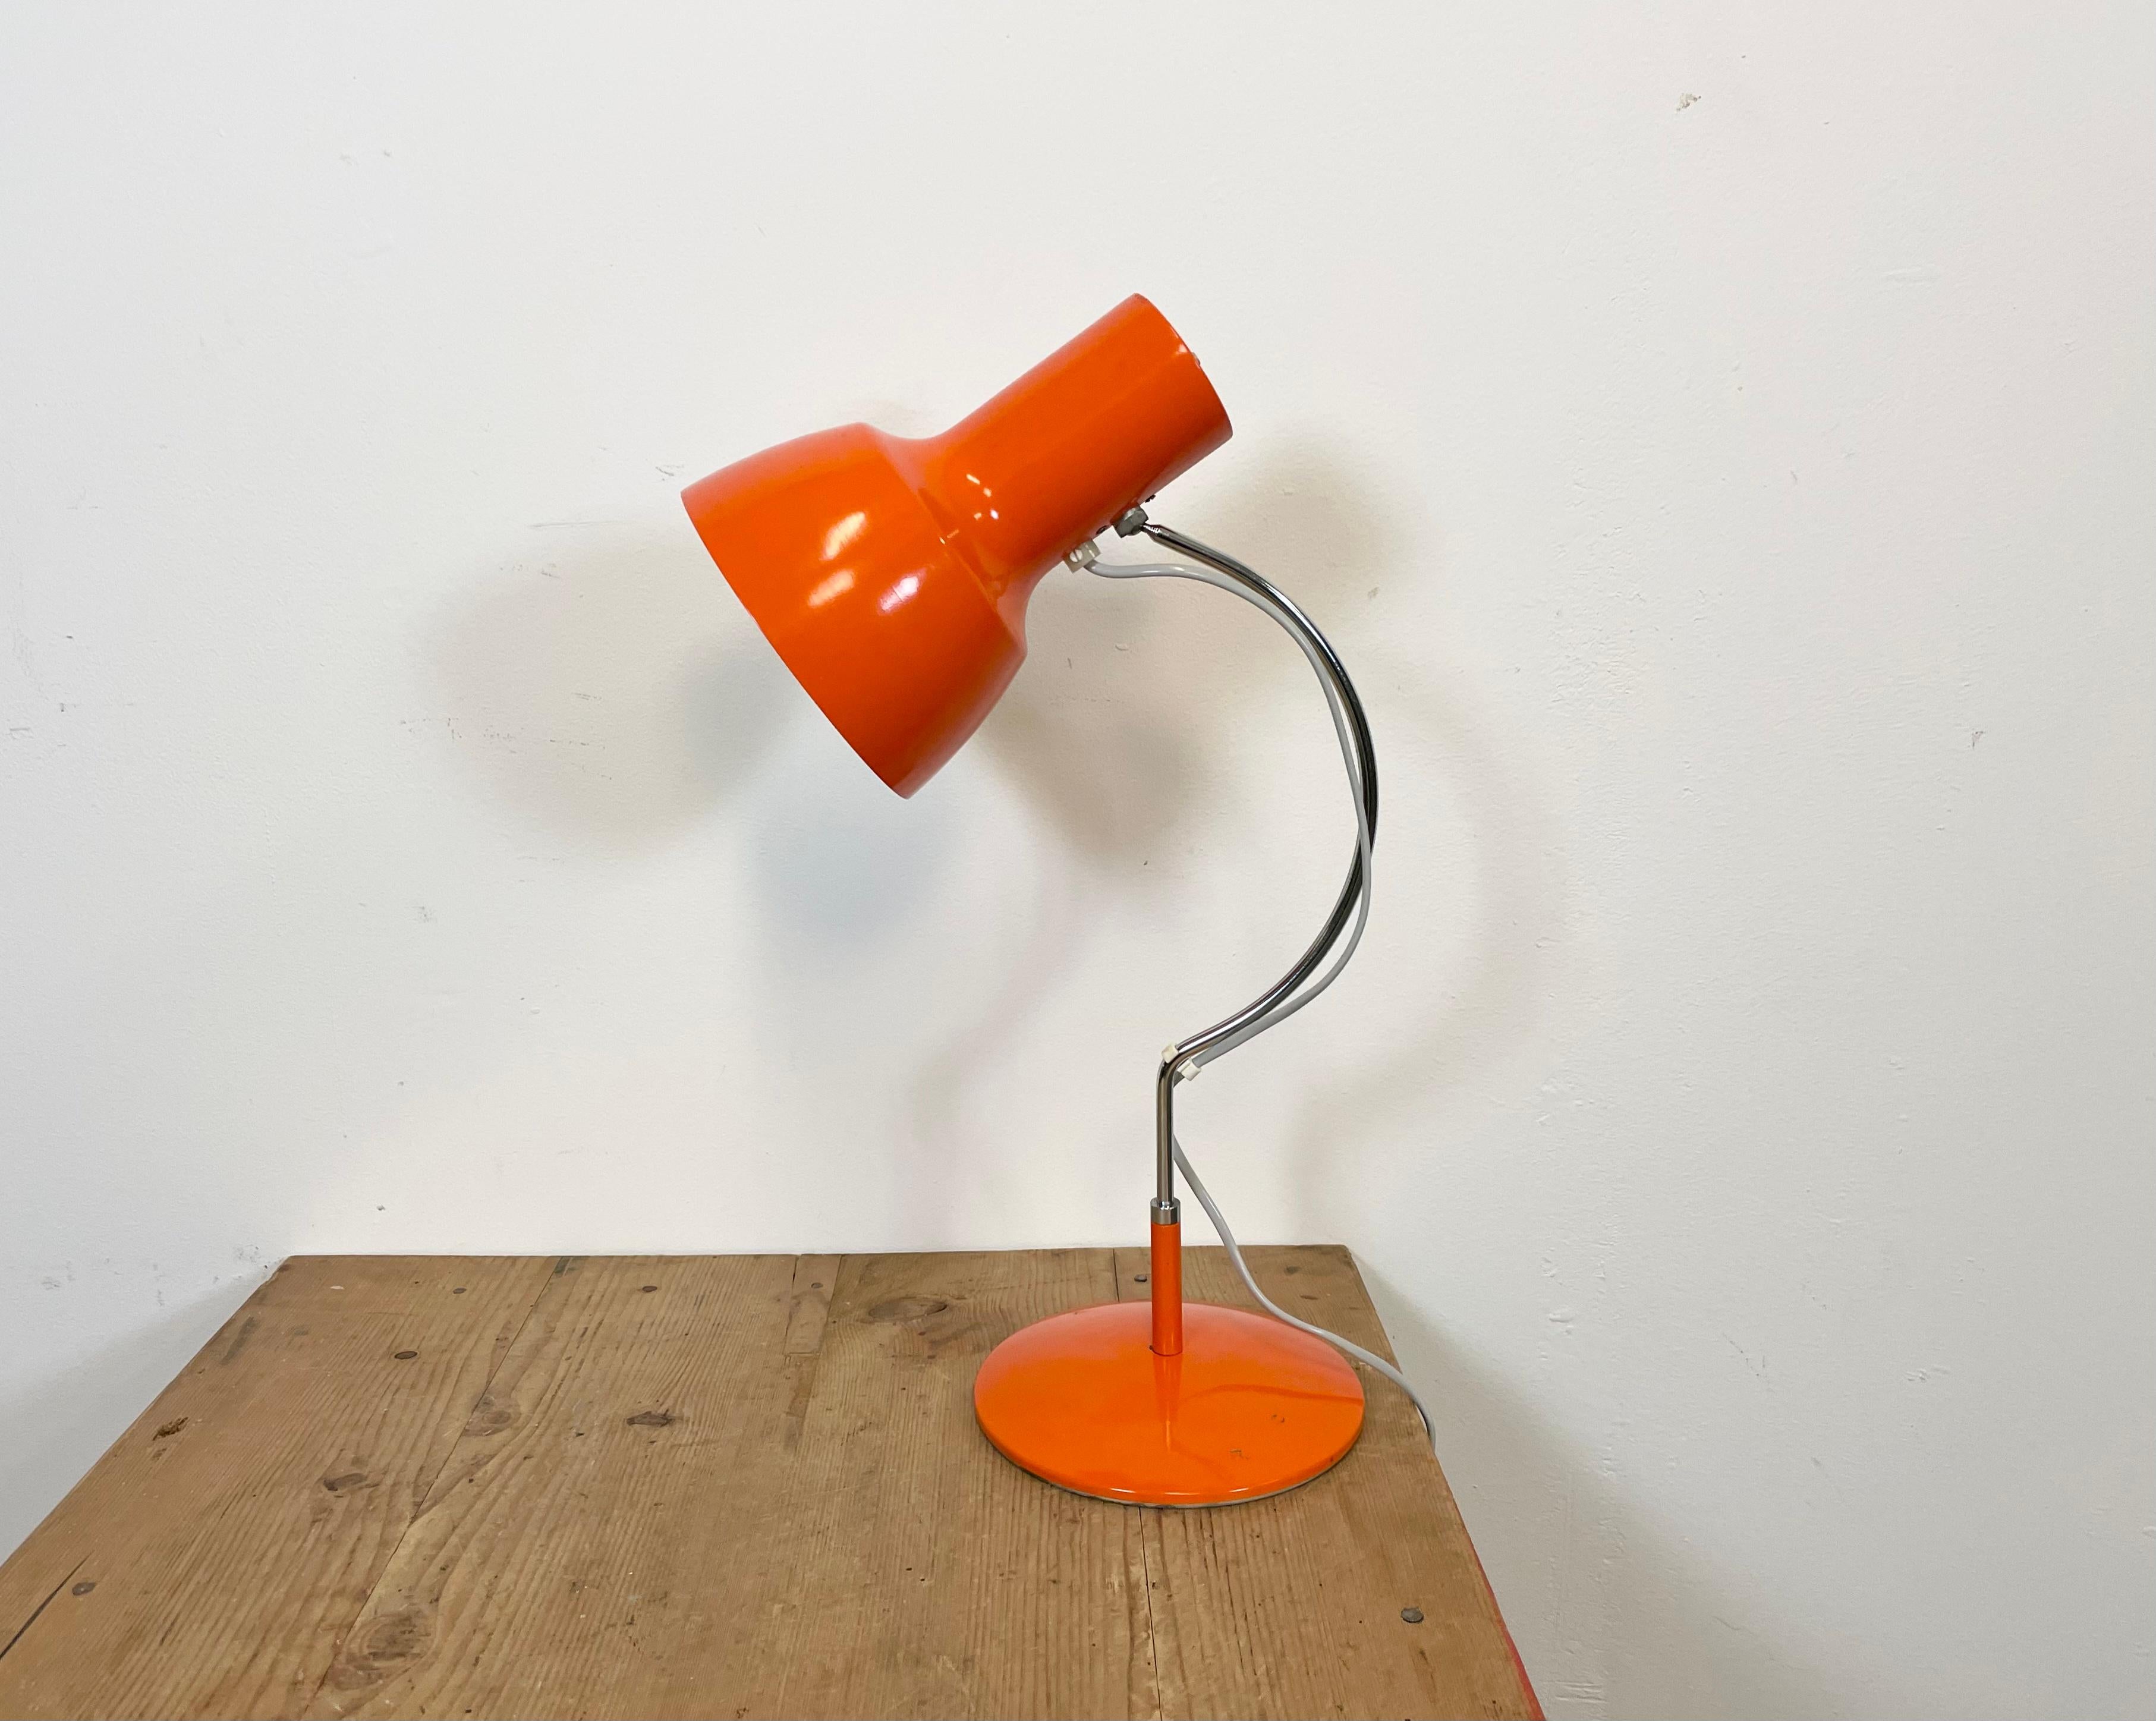 This table lamp, Napako model 1633, was designed by Josef Hurka and produced by Napako in former Czechoslovakia during the 1960s. The lamp has a steel body and an aluminium lampshade.Switch is situated directly on shade. Good vintage condition.